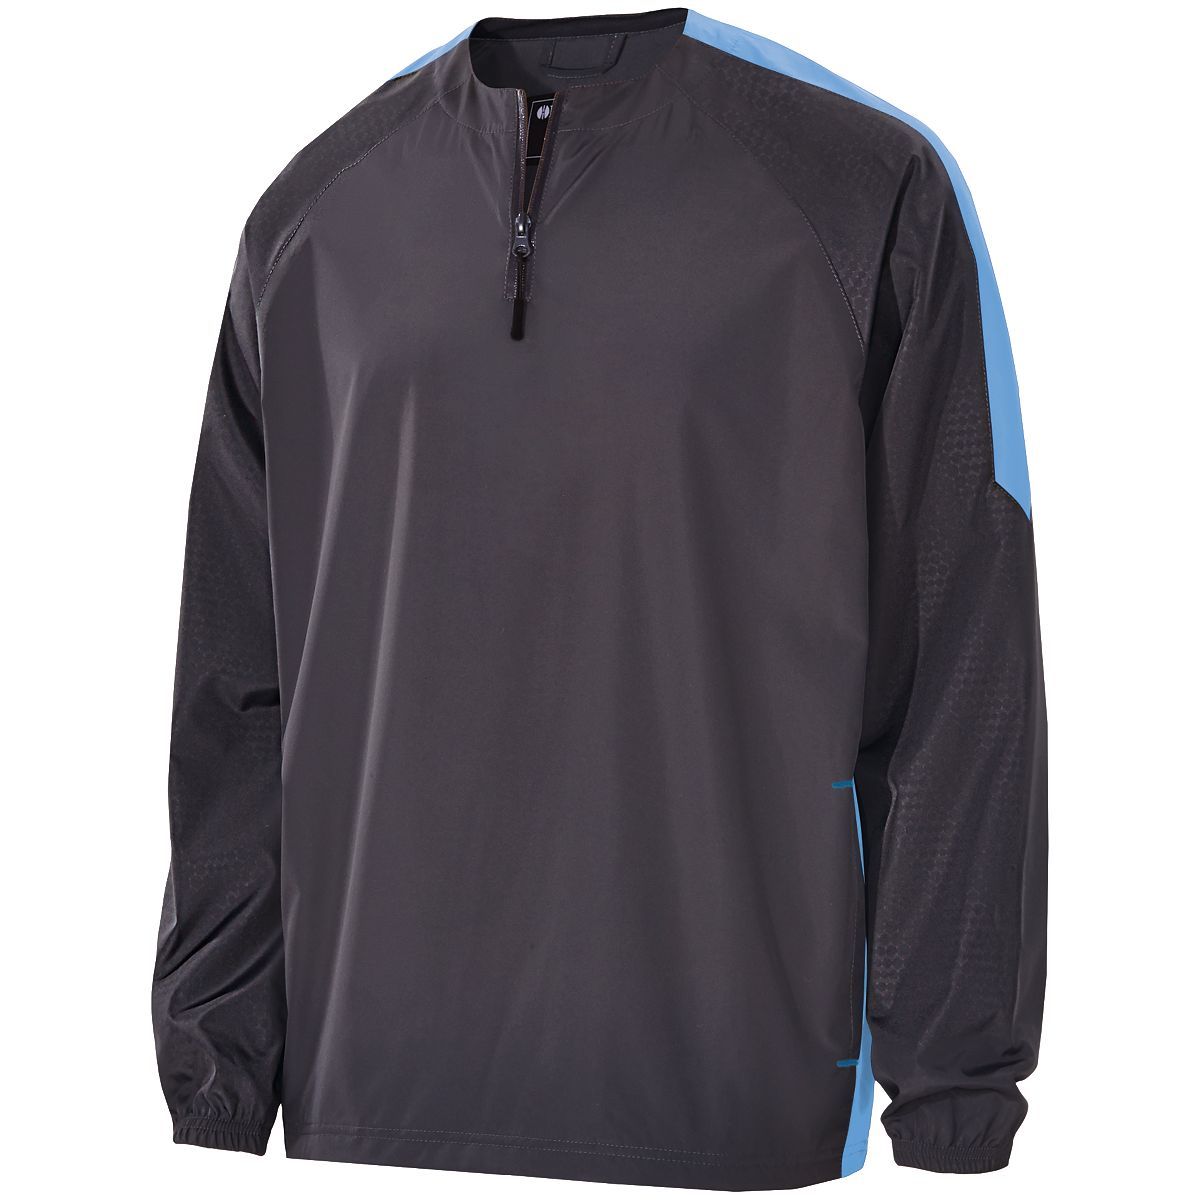 Youth Bionic 1/4 Zip Pullover 229227